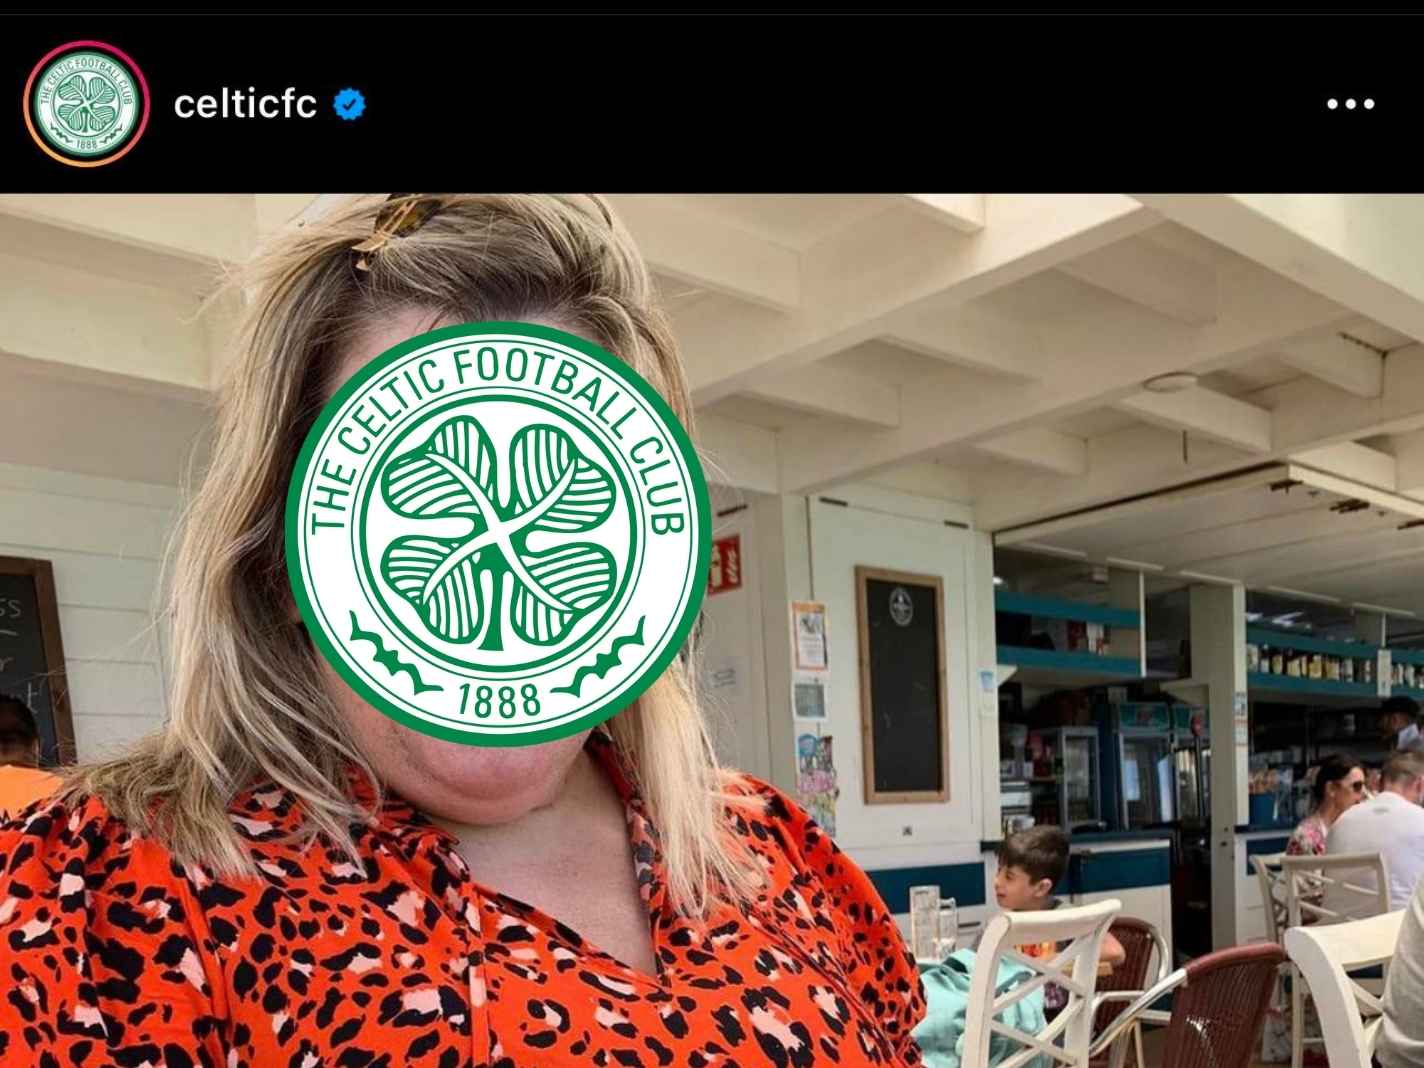 The Hilarious Moment Celtic's Social Media Admin Fails To Switch Accounts